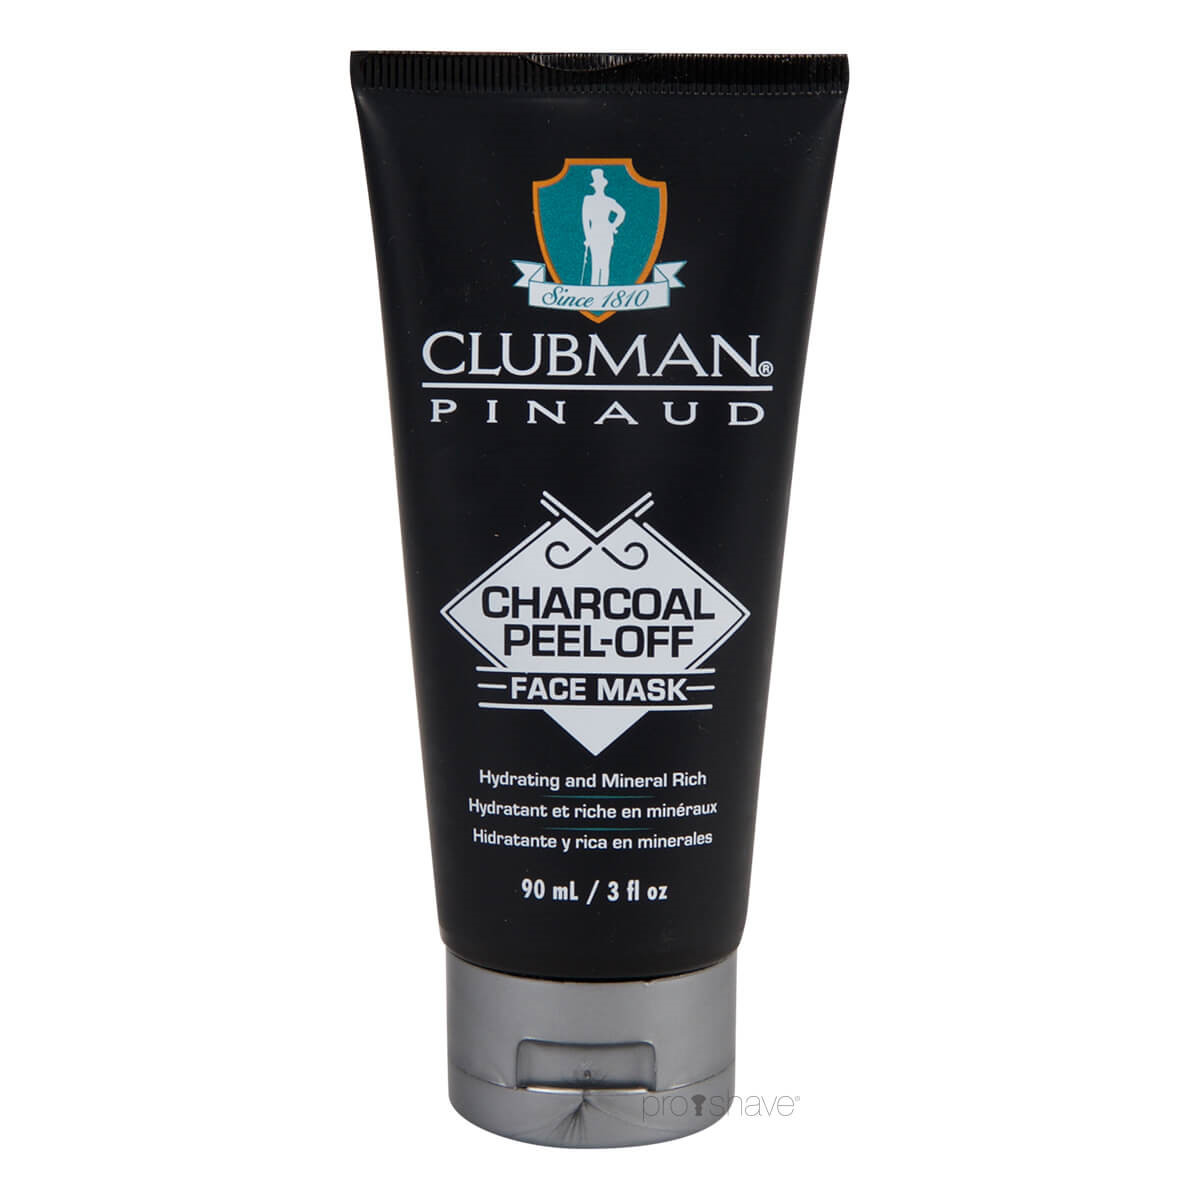 Se Pinaud Clubman Charcoal Peel-Off Face Mask, 90 ml. hos Proshave